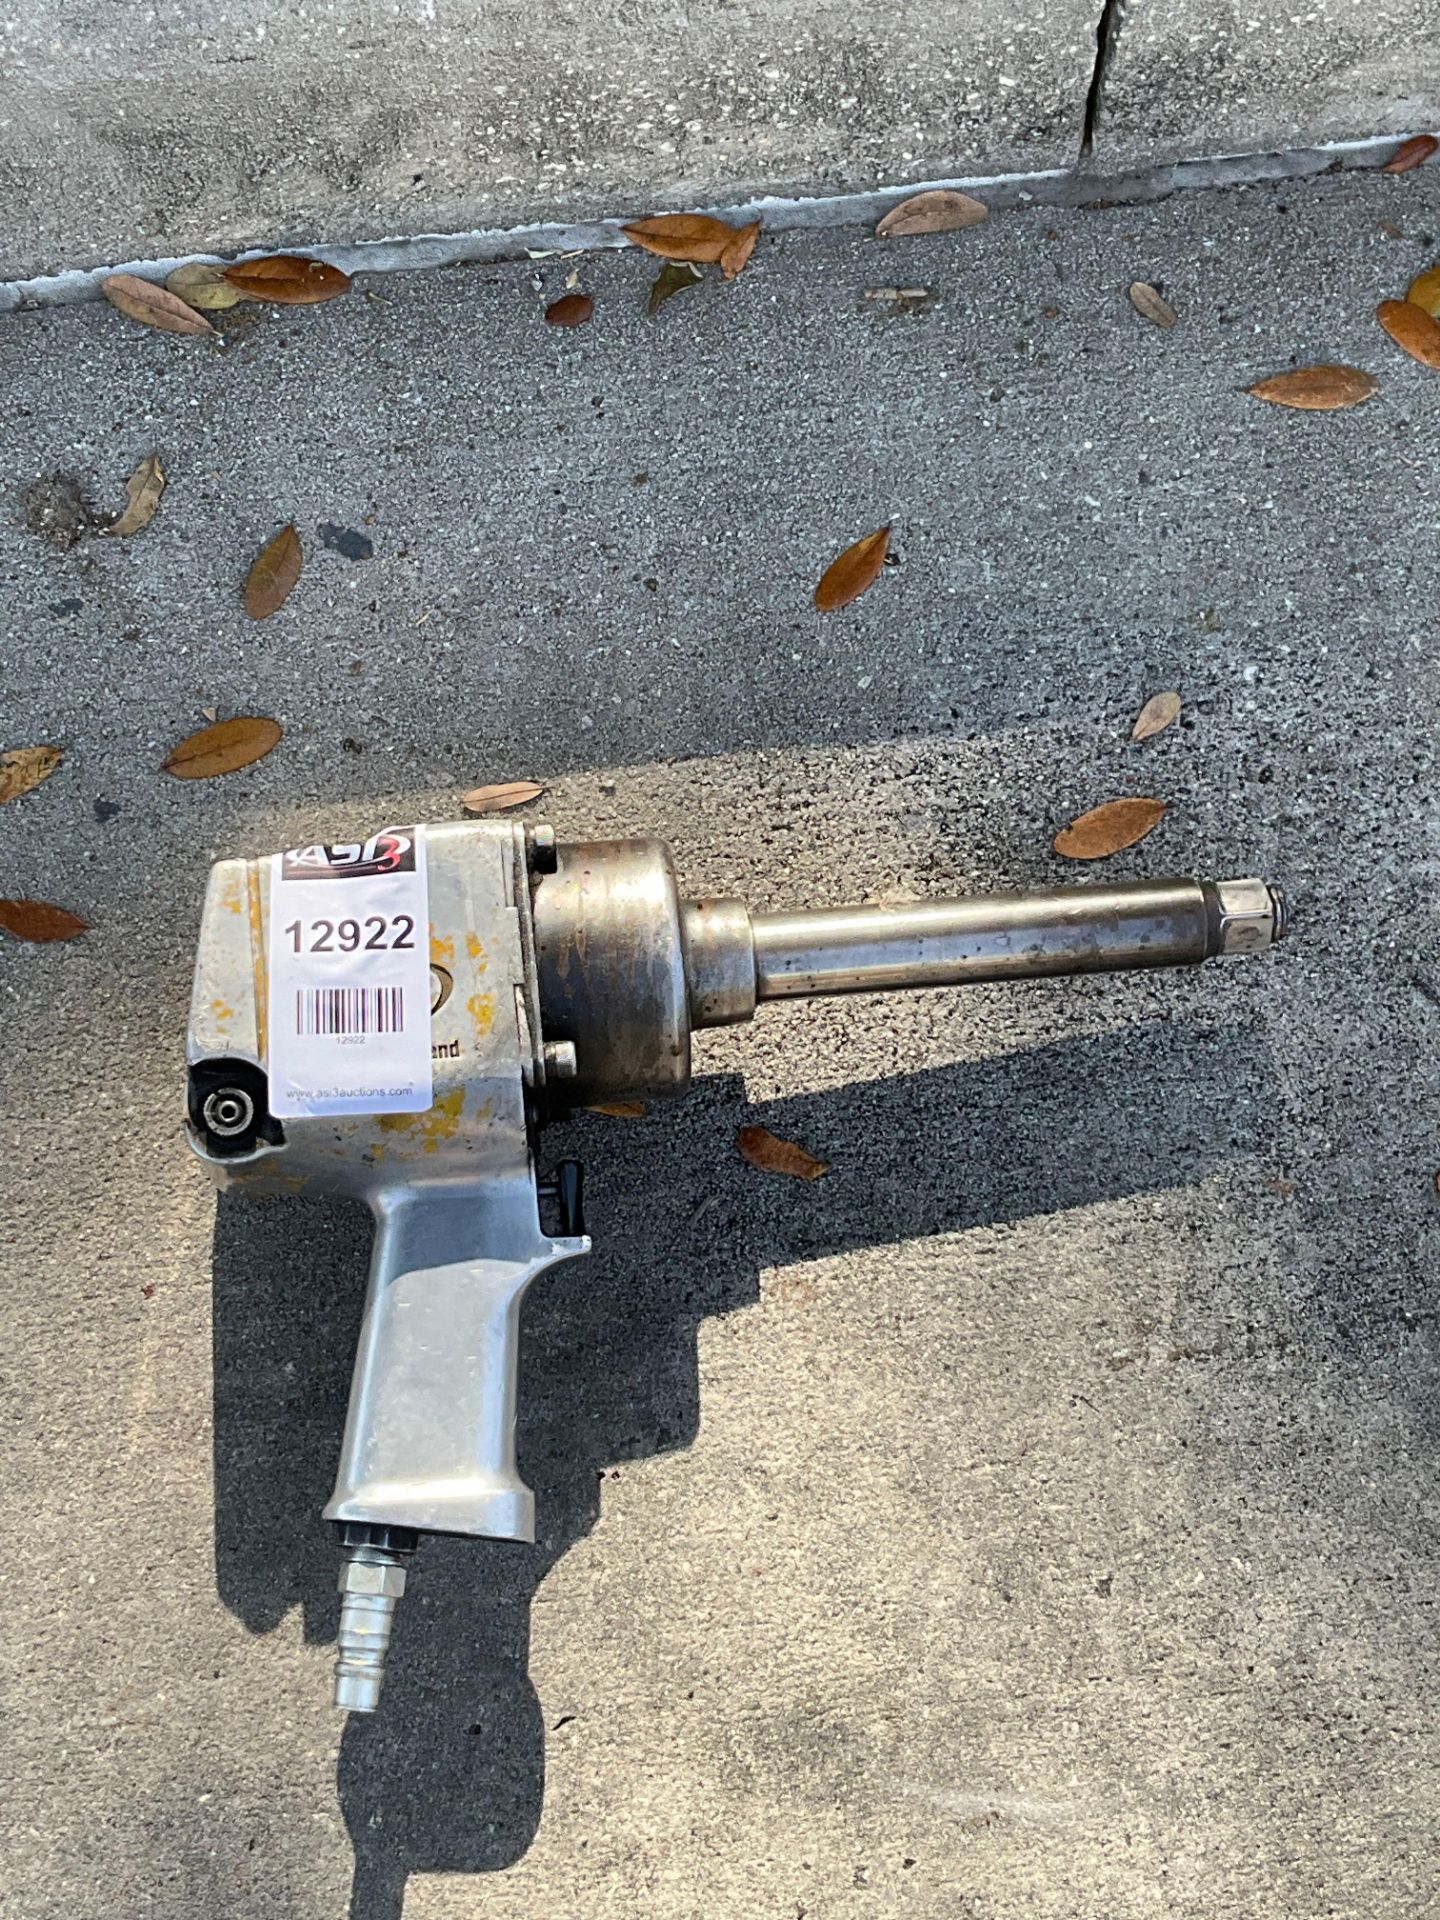 INGERSOLL-RAND 261 3/4" PNEUMATIC IMPACT WRENCH , APPROX 90 PSI, APPROX 6.2 BAR, APPROX 5,500 RPM - Image 7 of 7